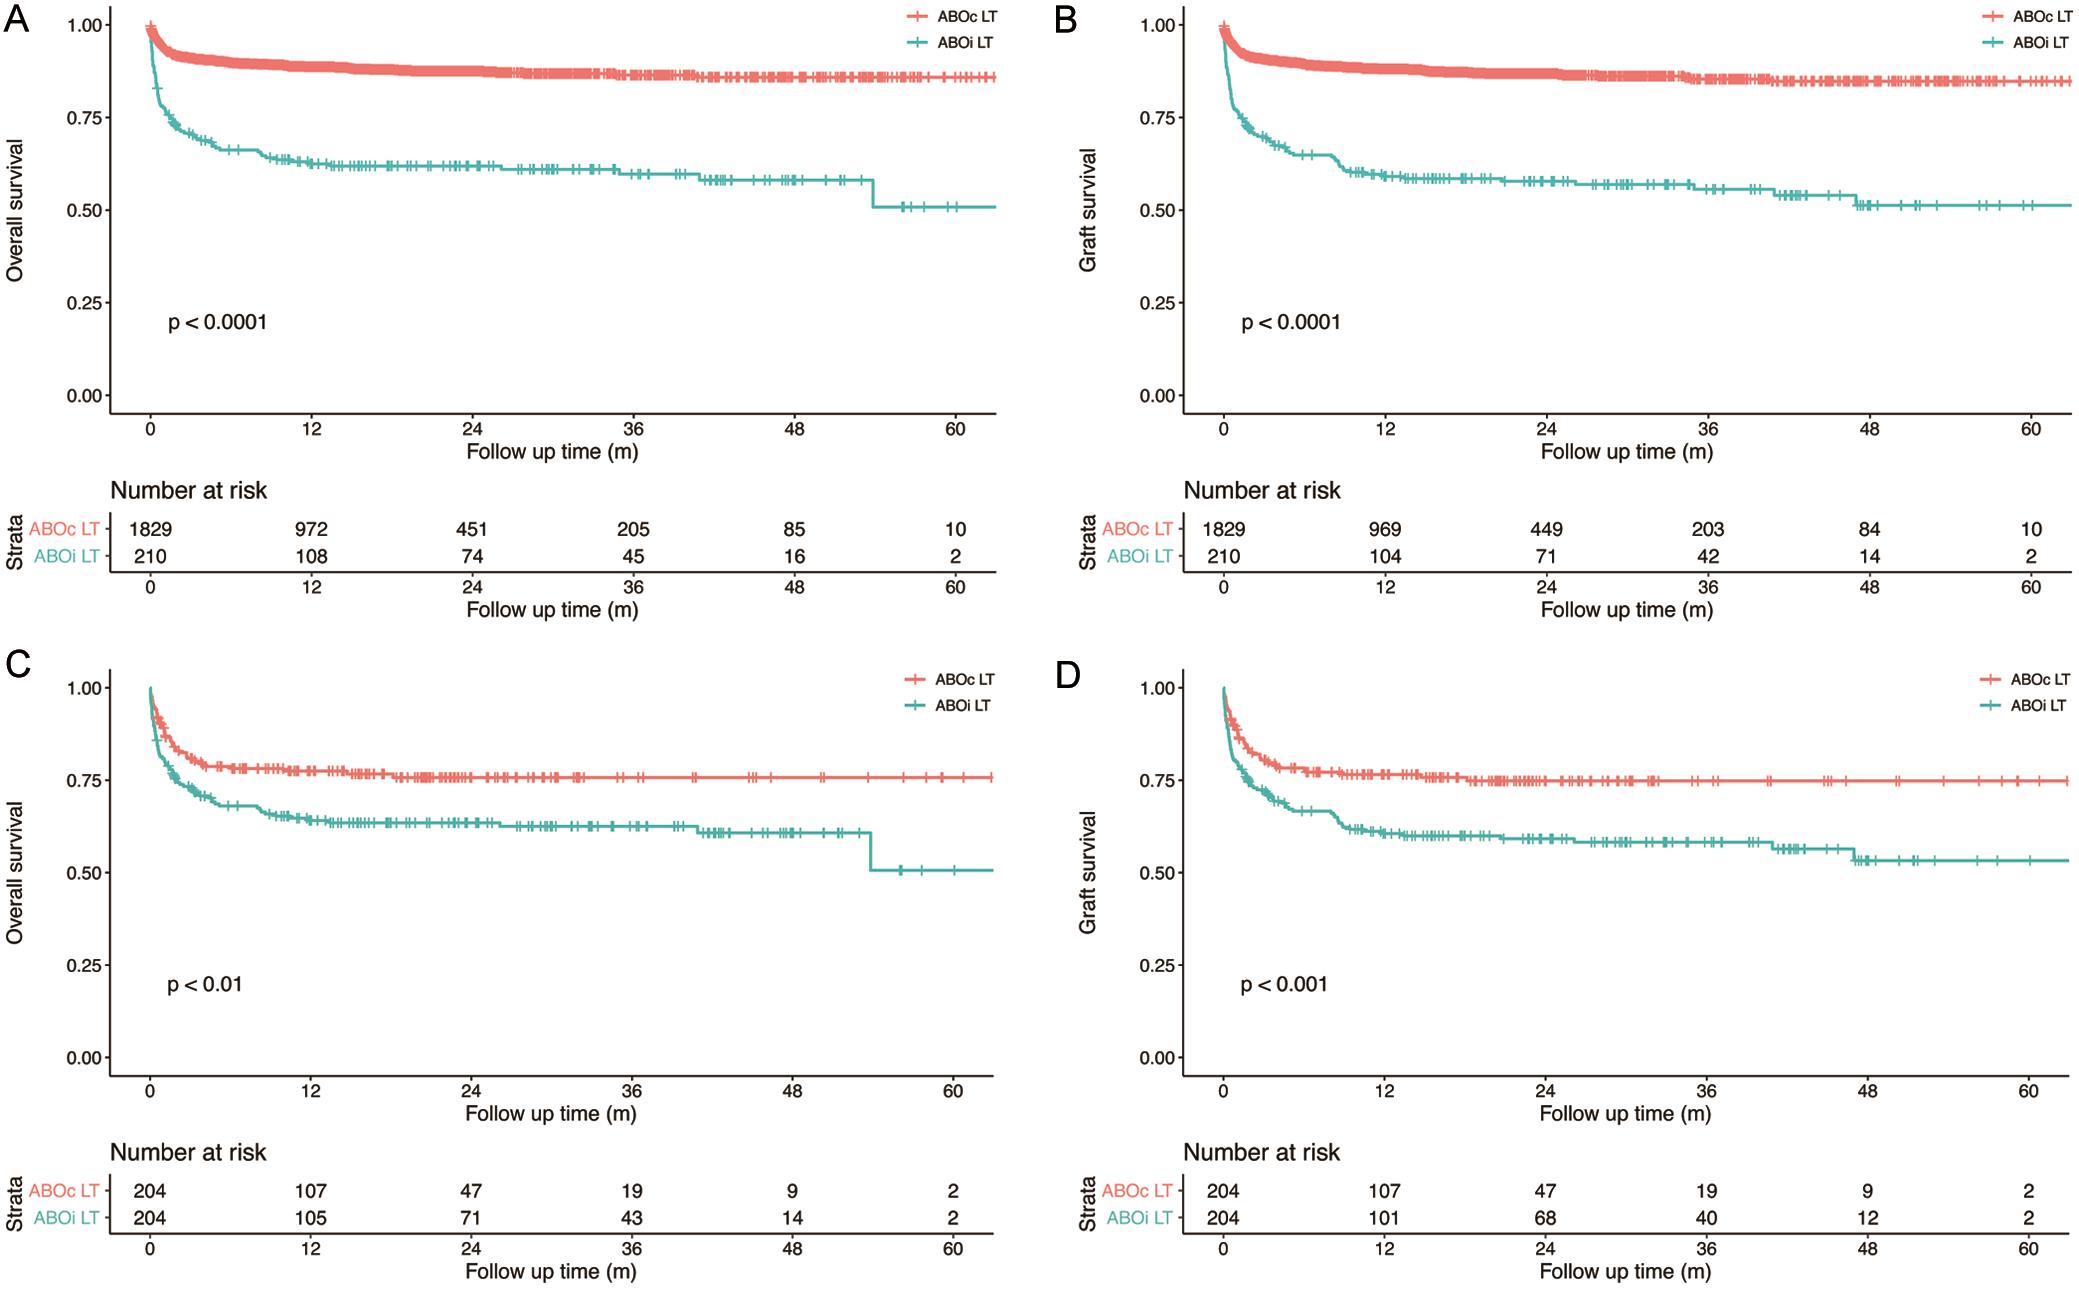 Comparison of the overall survival and graft survival rates in ABOi and ABOc LT recipients.